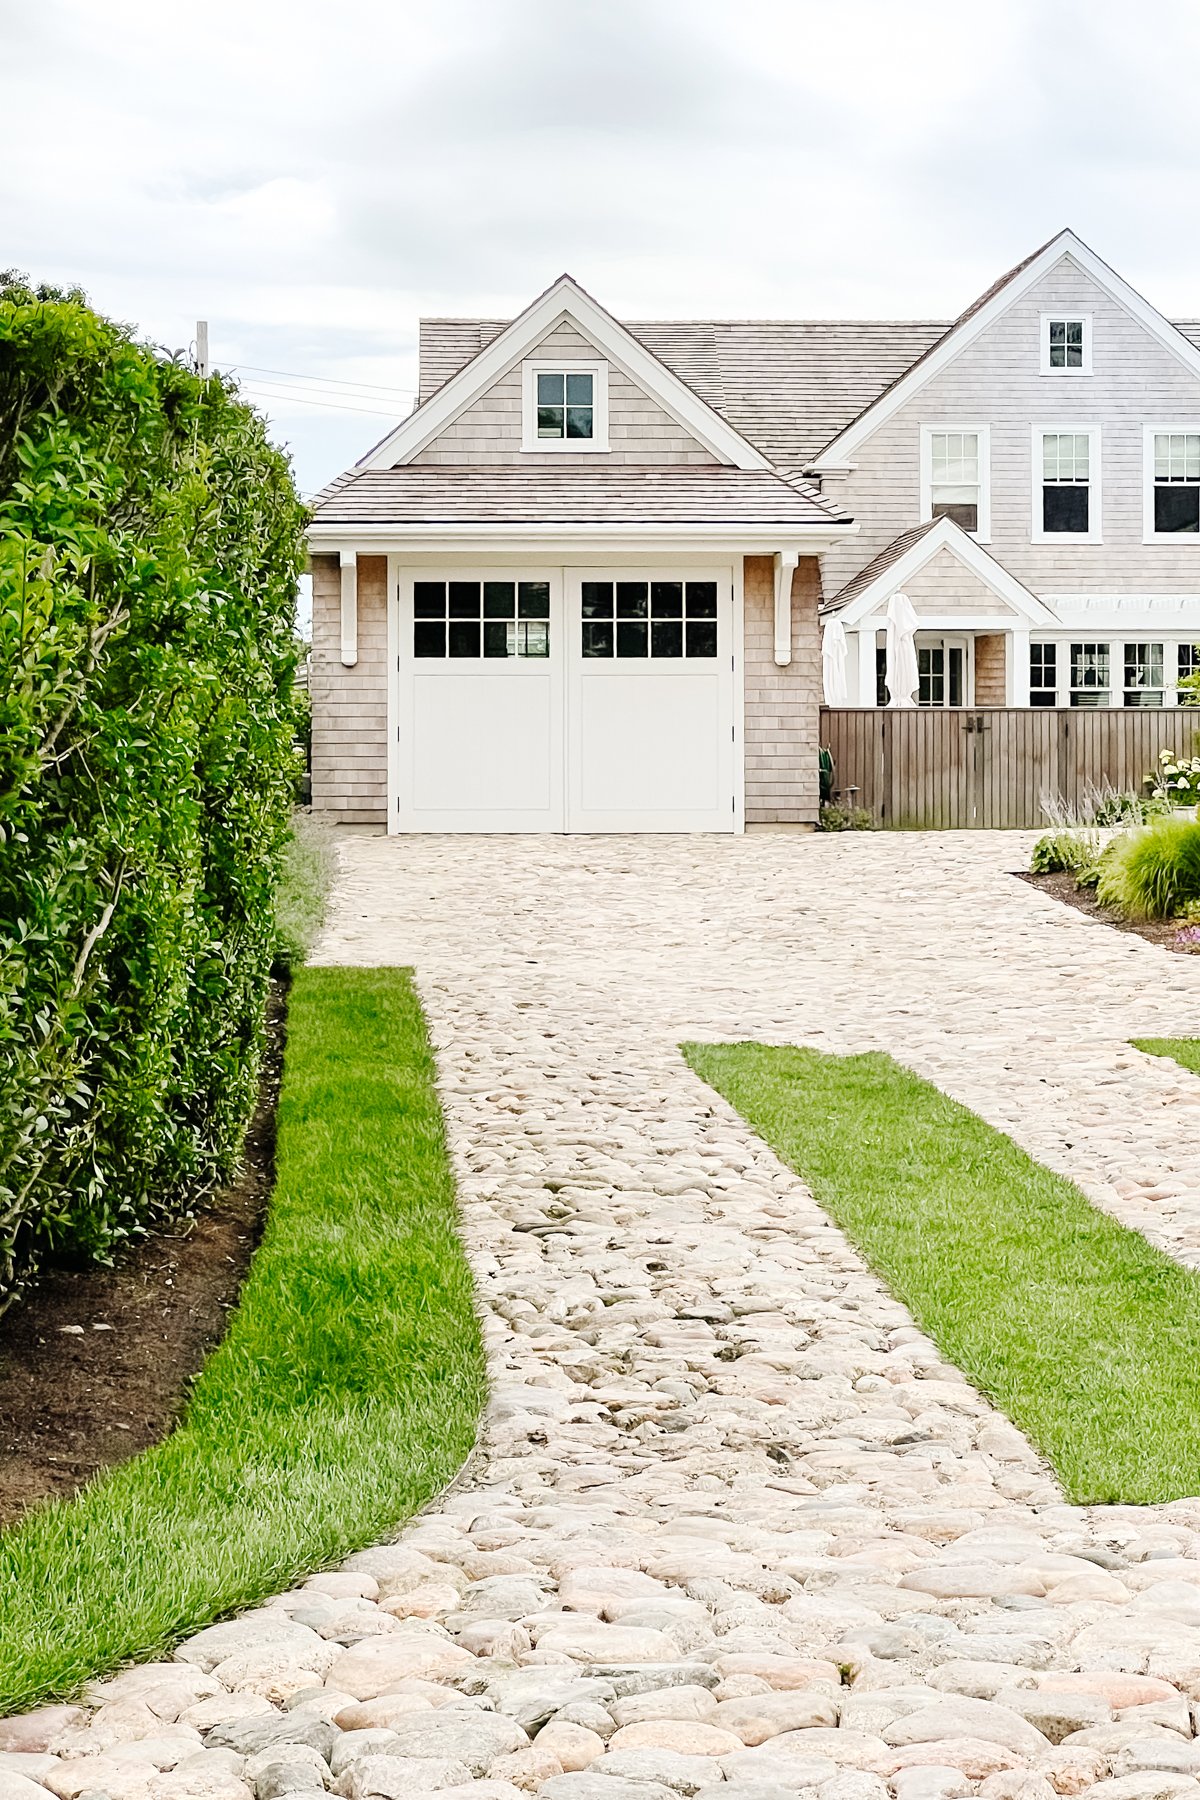 A gray shingled Nantucket house with a white carriage garage door.